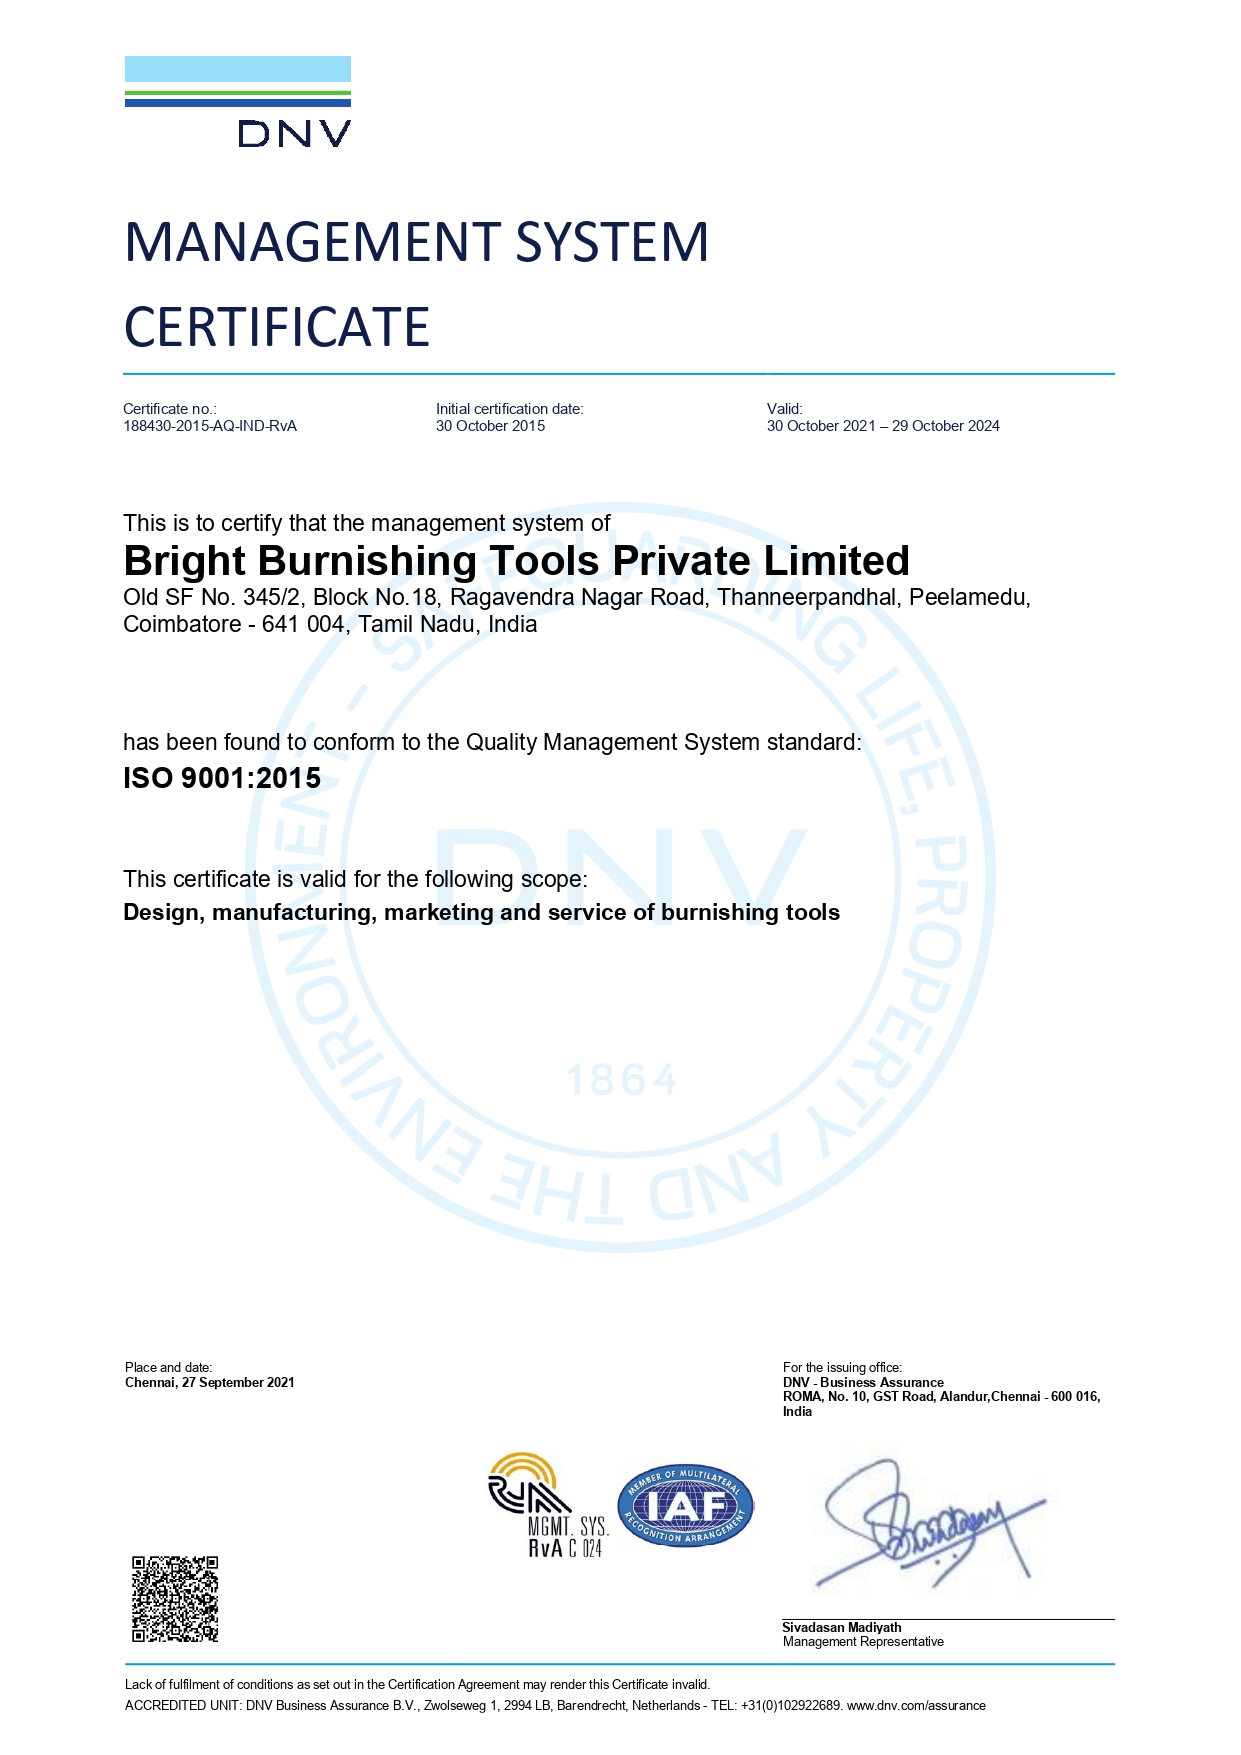 DNV ISO 9001 Certificate for Design, Manufacture, Marketing and Service of all types of burnishing tools